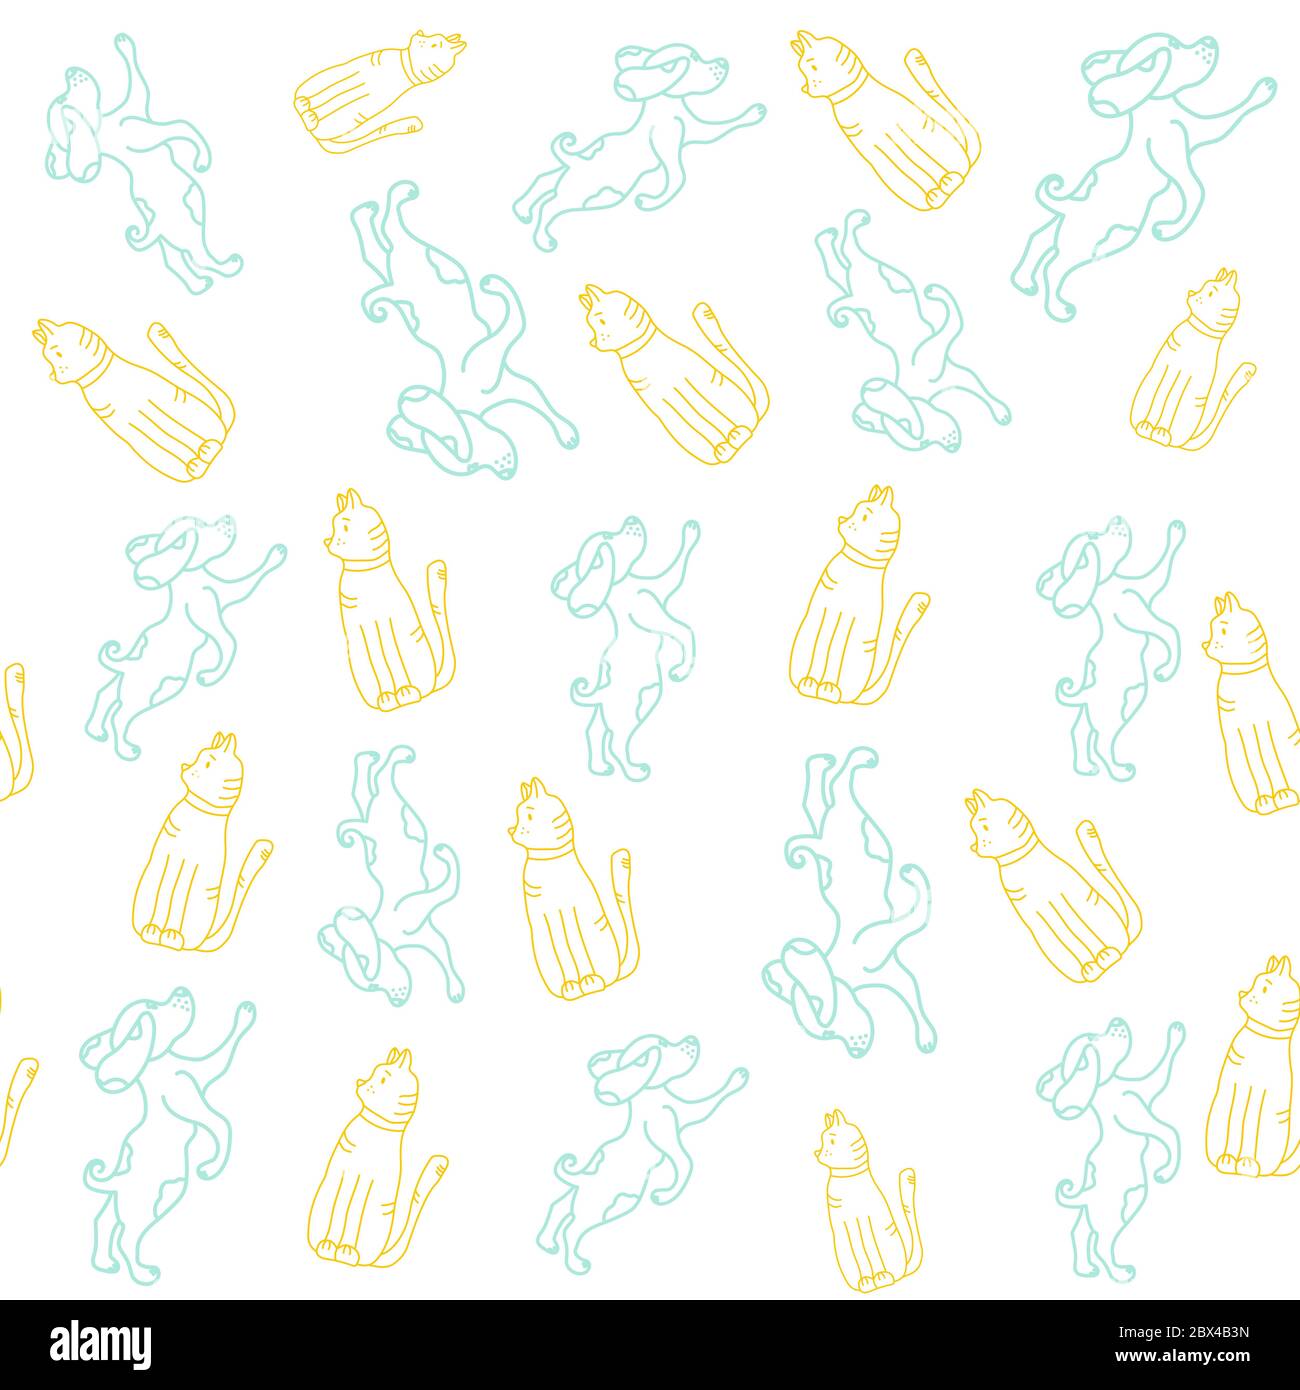 Animal seamless pattern. Pets Blue dog and yellow cat. Outline. Can be used for baby, fashion design, shirts, fashion print, fashion, t-shirt, packagi Stock Vector